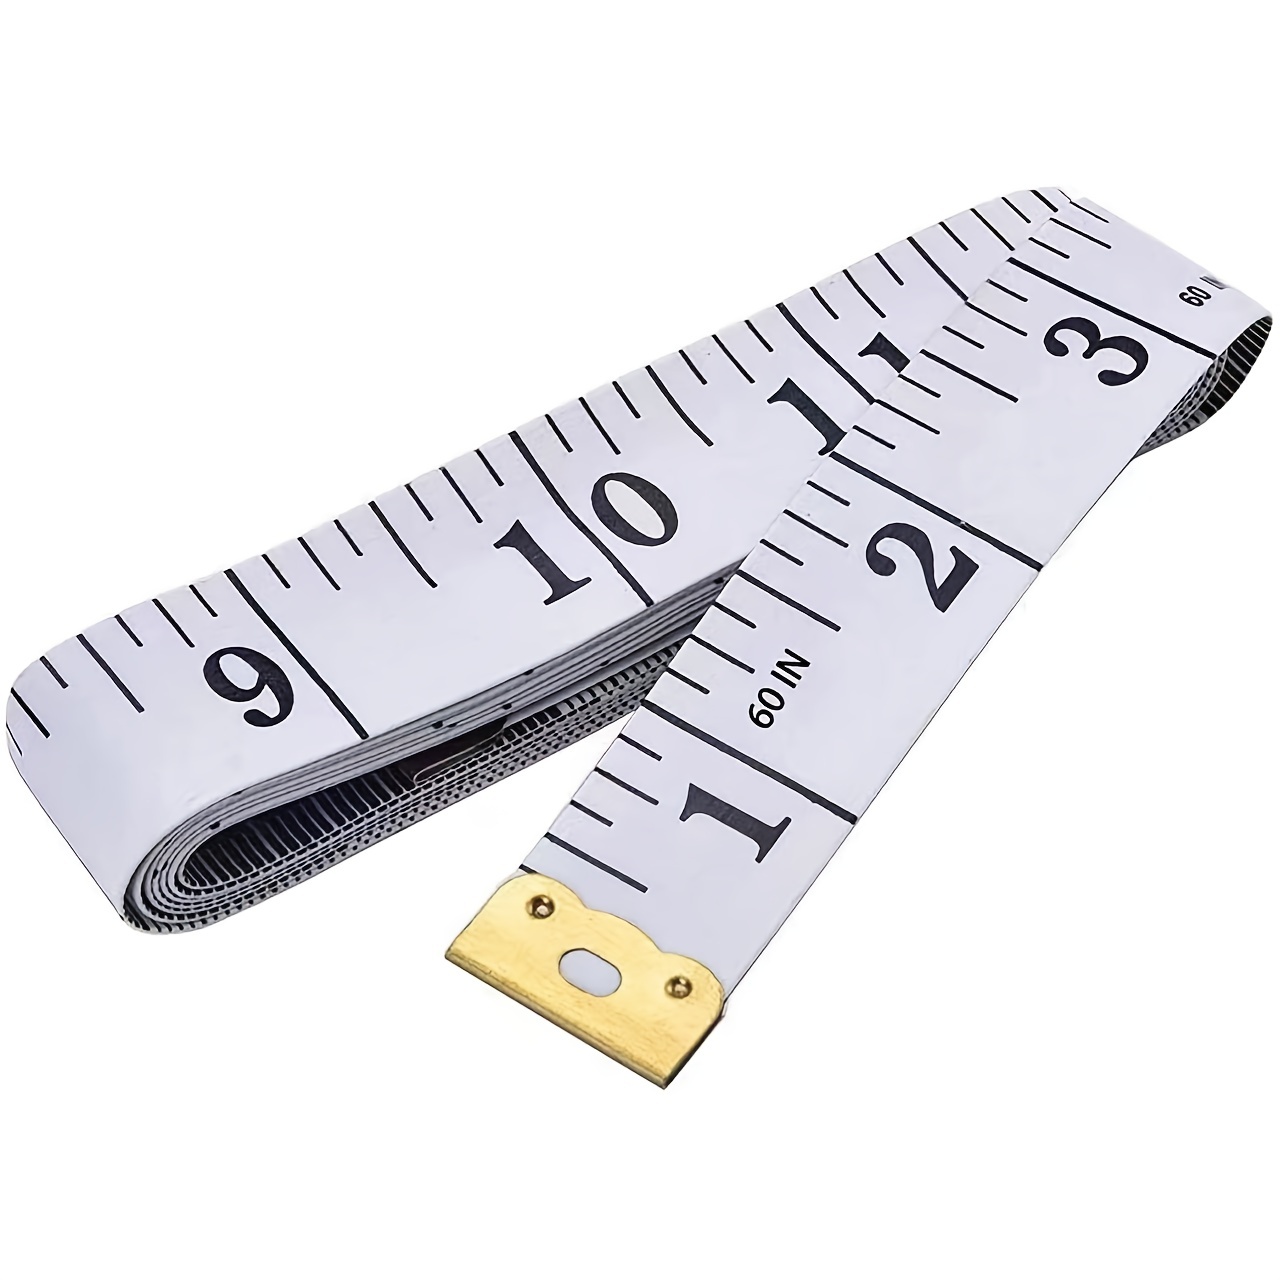  Automatic Telescopic Tape Measure, Portable Body Measure Tape  60inch Self Tightening Body Measuring Ruler Accurate Sewing Tape Measure  for Body Waist Hip Bust Arms (2 Pack Black) : Arts, Crafts 